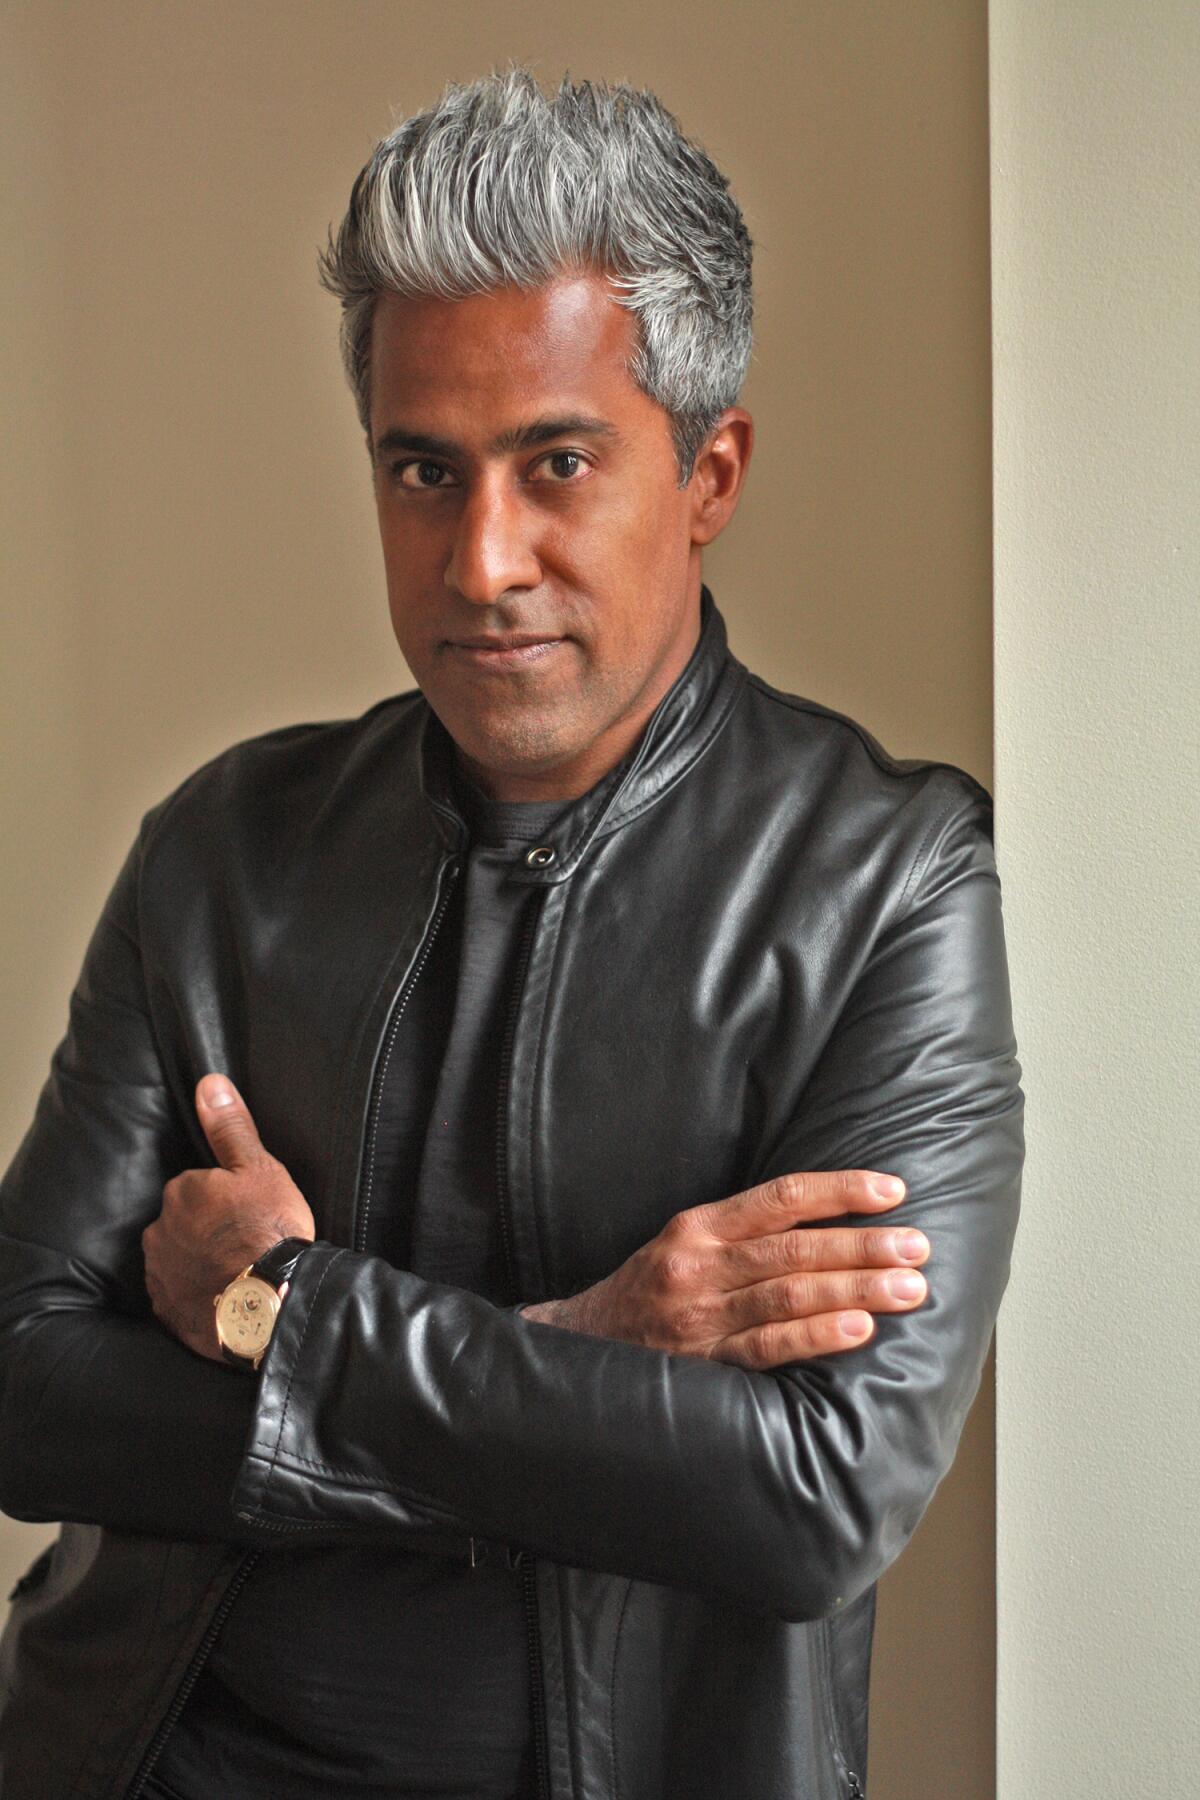 A man with gray hair and a leather jacket poses against a wall, his arms folded.